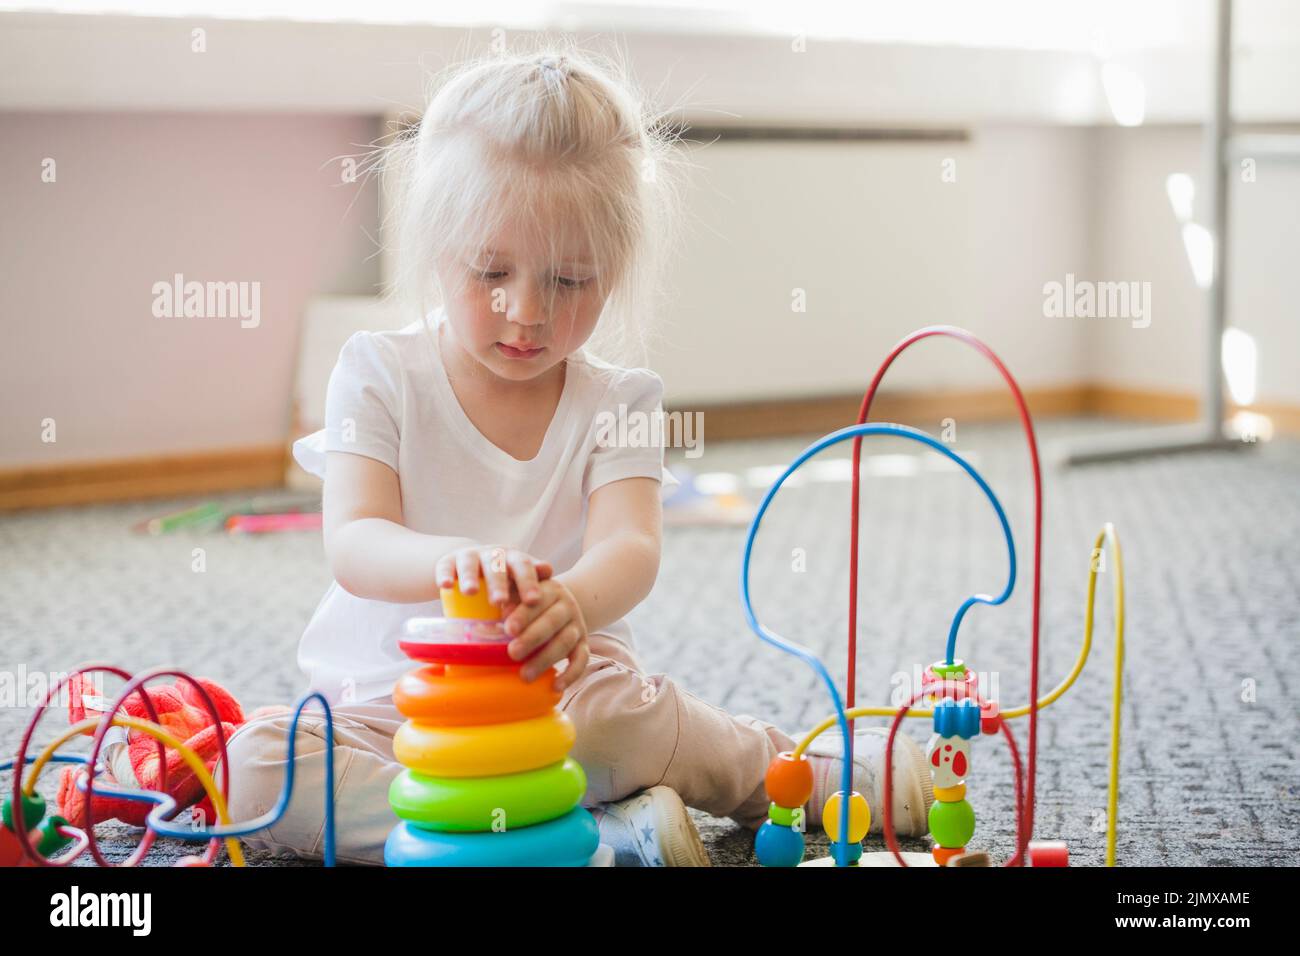 Concentrated kid spending time with toys Stock Photo